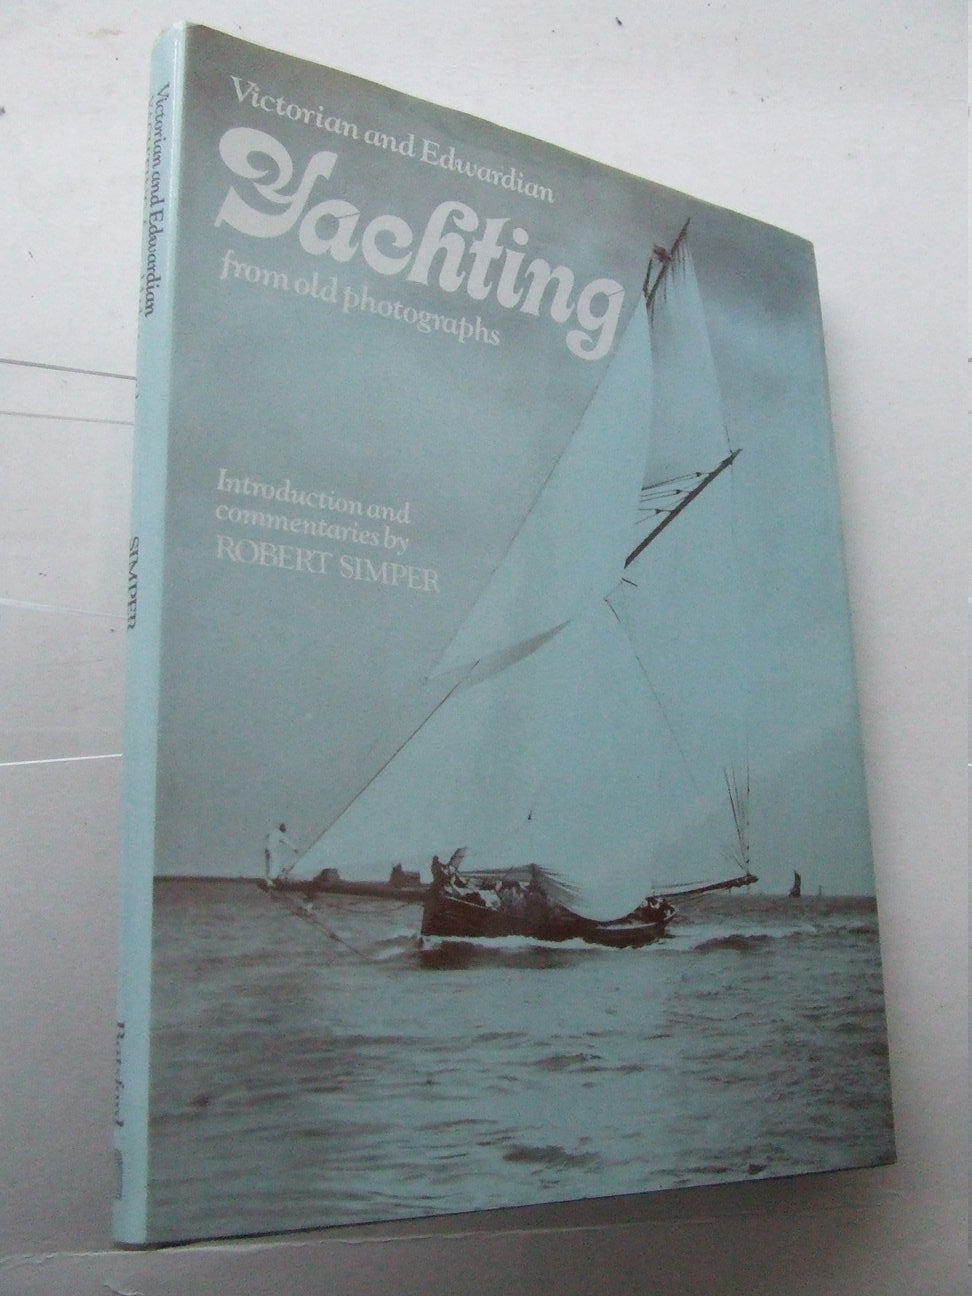 Victorian and Edwardian Yachting from Old Photographs